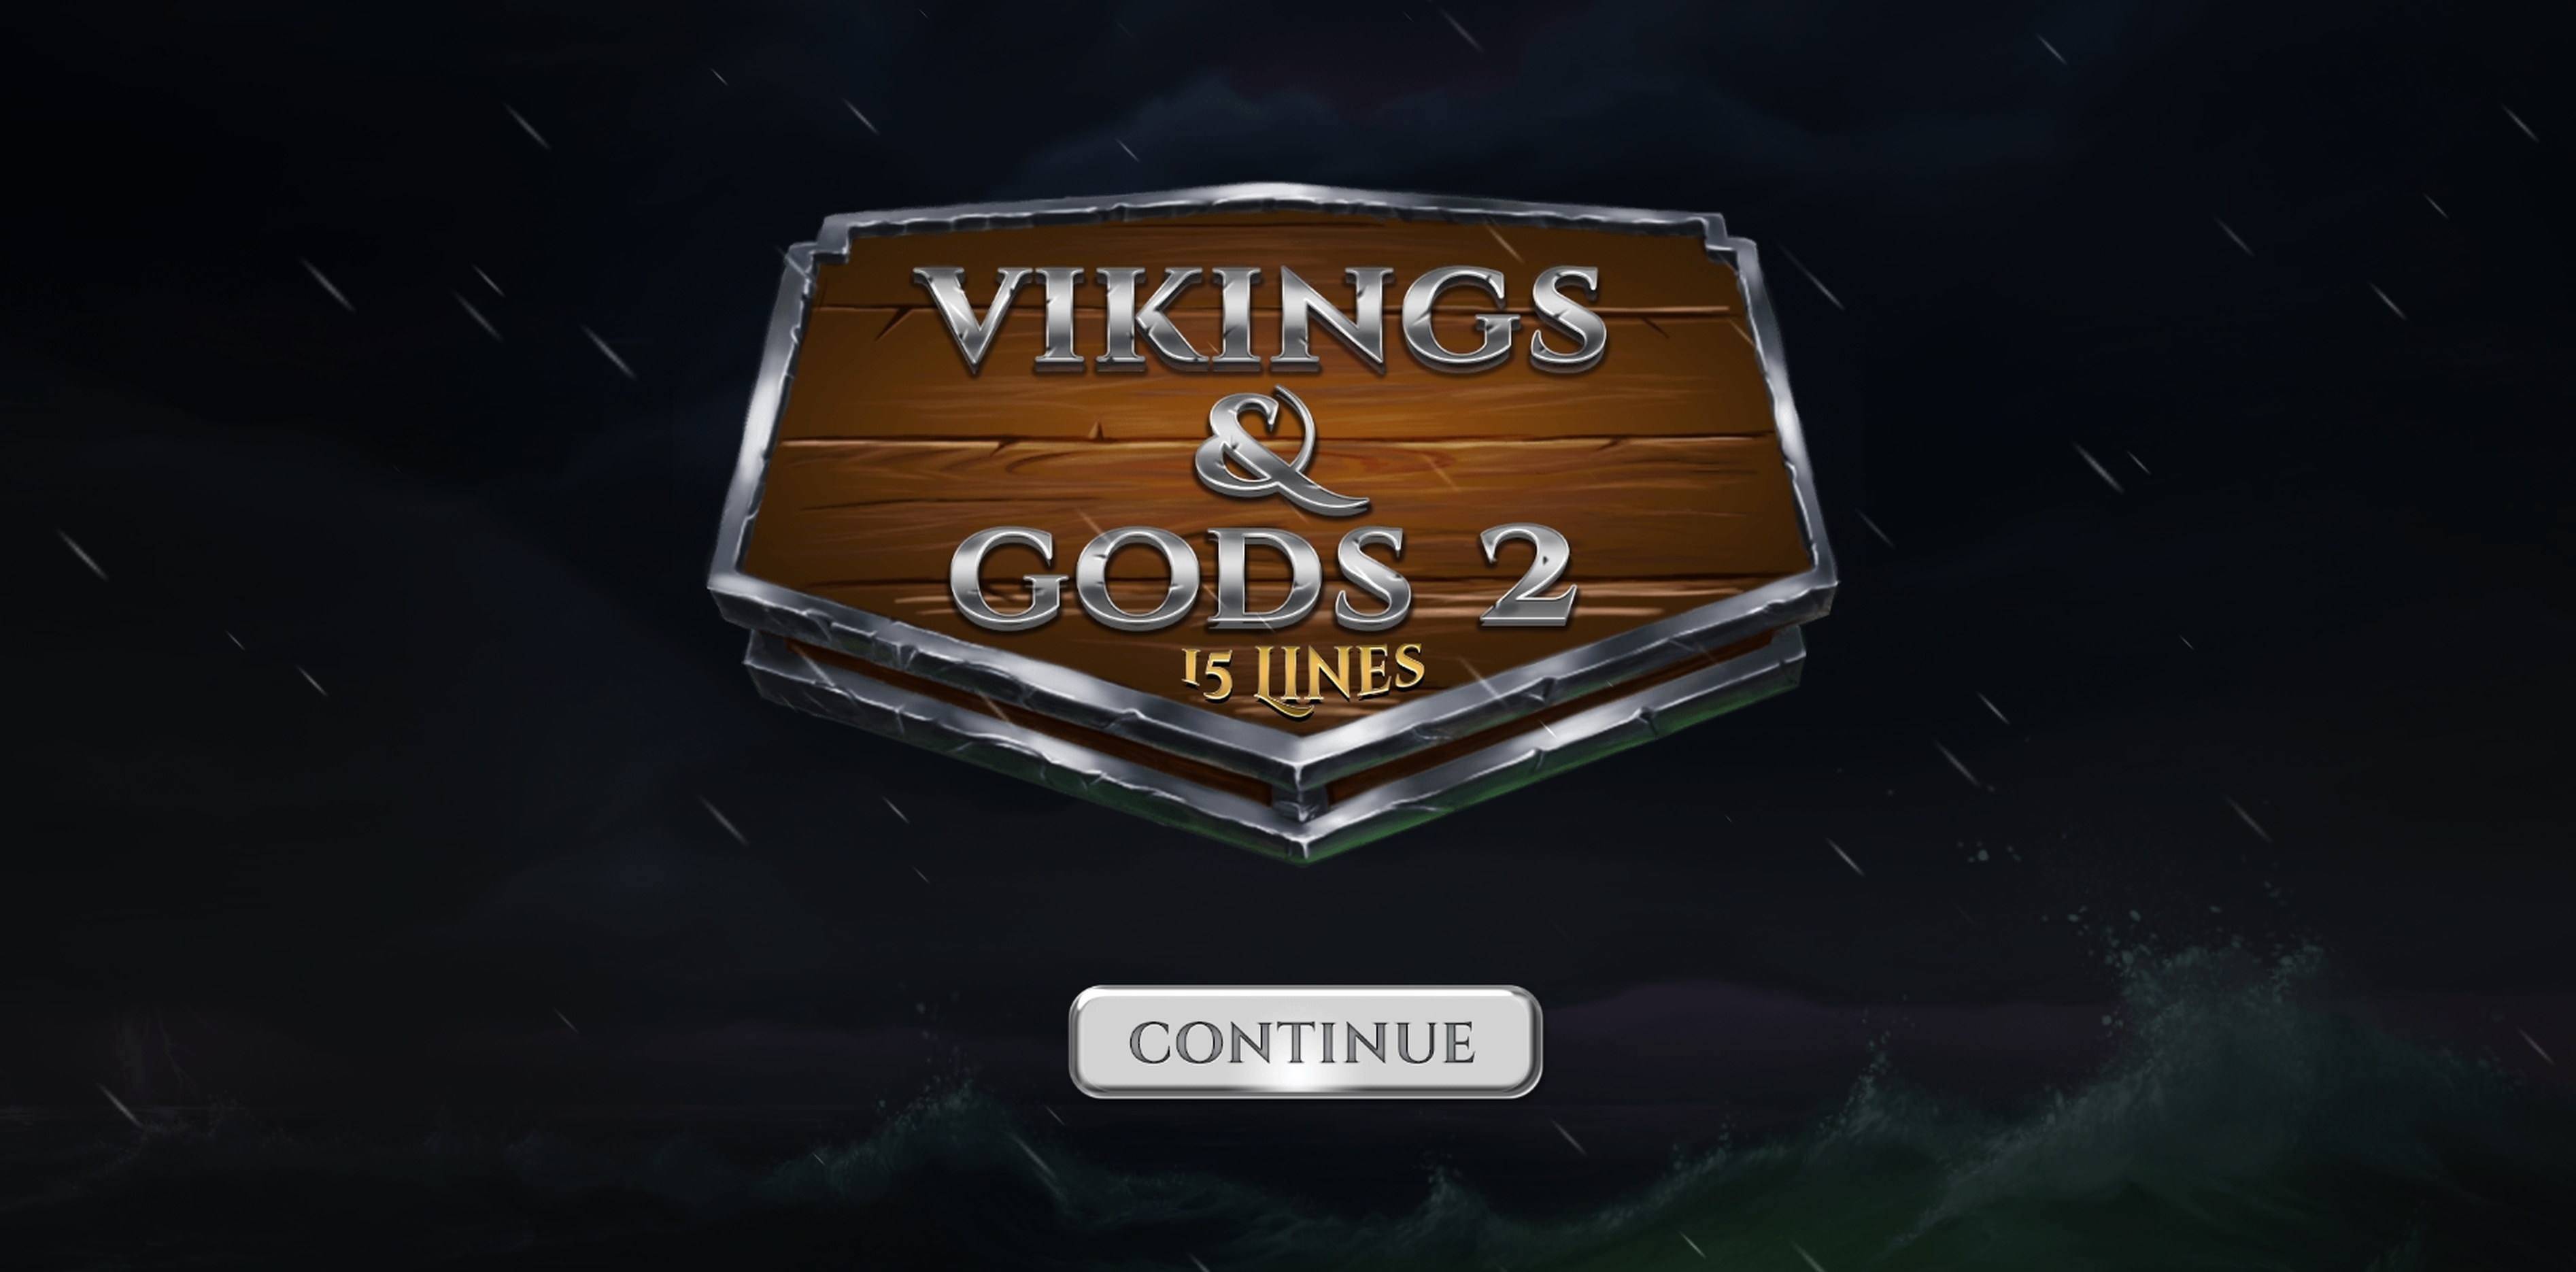 Play Vikings and Gods 2 15 Lines Free Casino Slot Game by Spinomenal